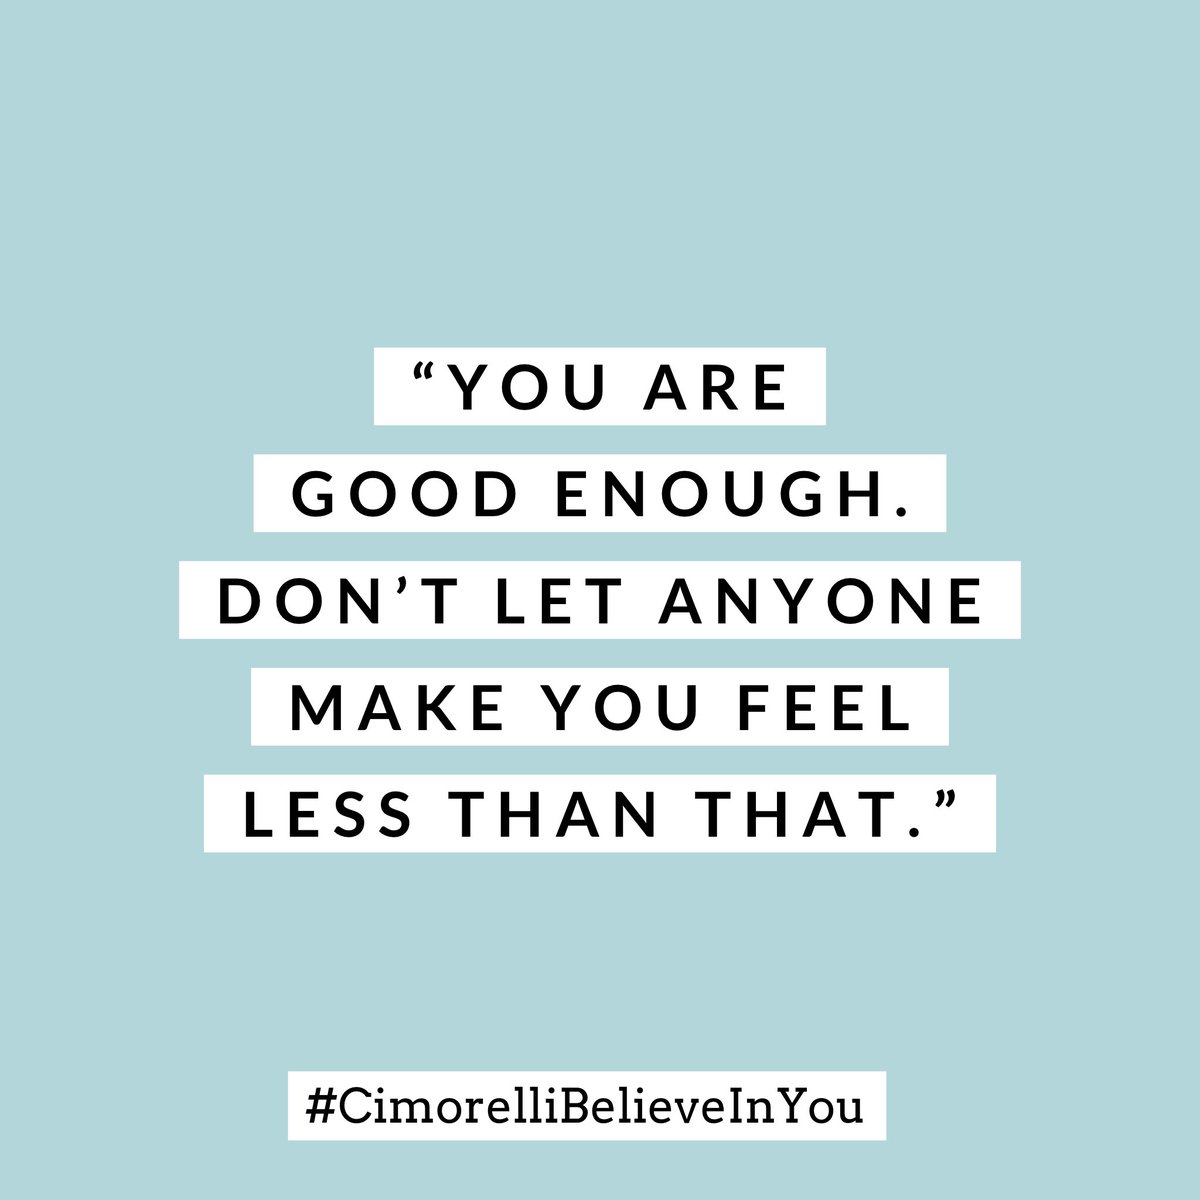 Cimorelli On Twitter Motivationalmonday You Are Good Enough You Are Smart Enough You Are Strong Enough Never Let Anyone Make You Feel Any Less Than That Https T Co 7wn8faeyod